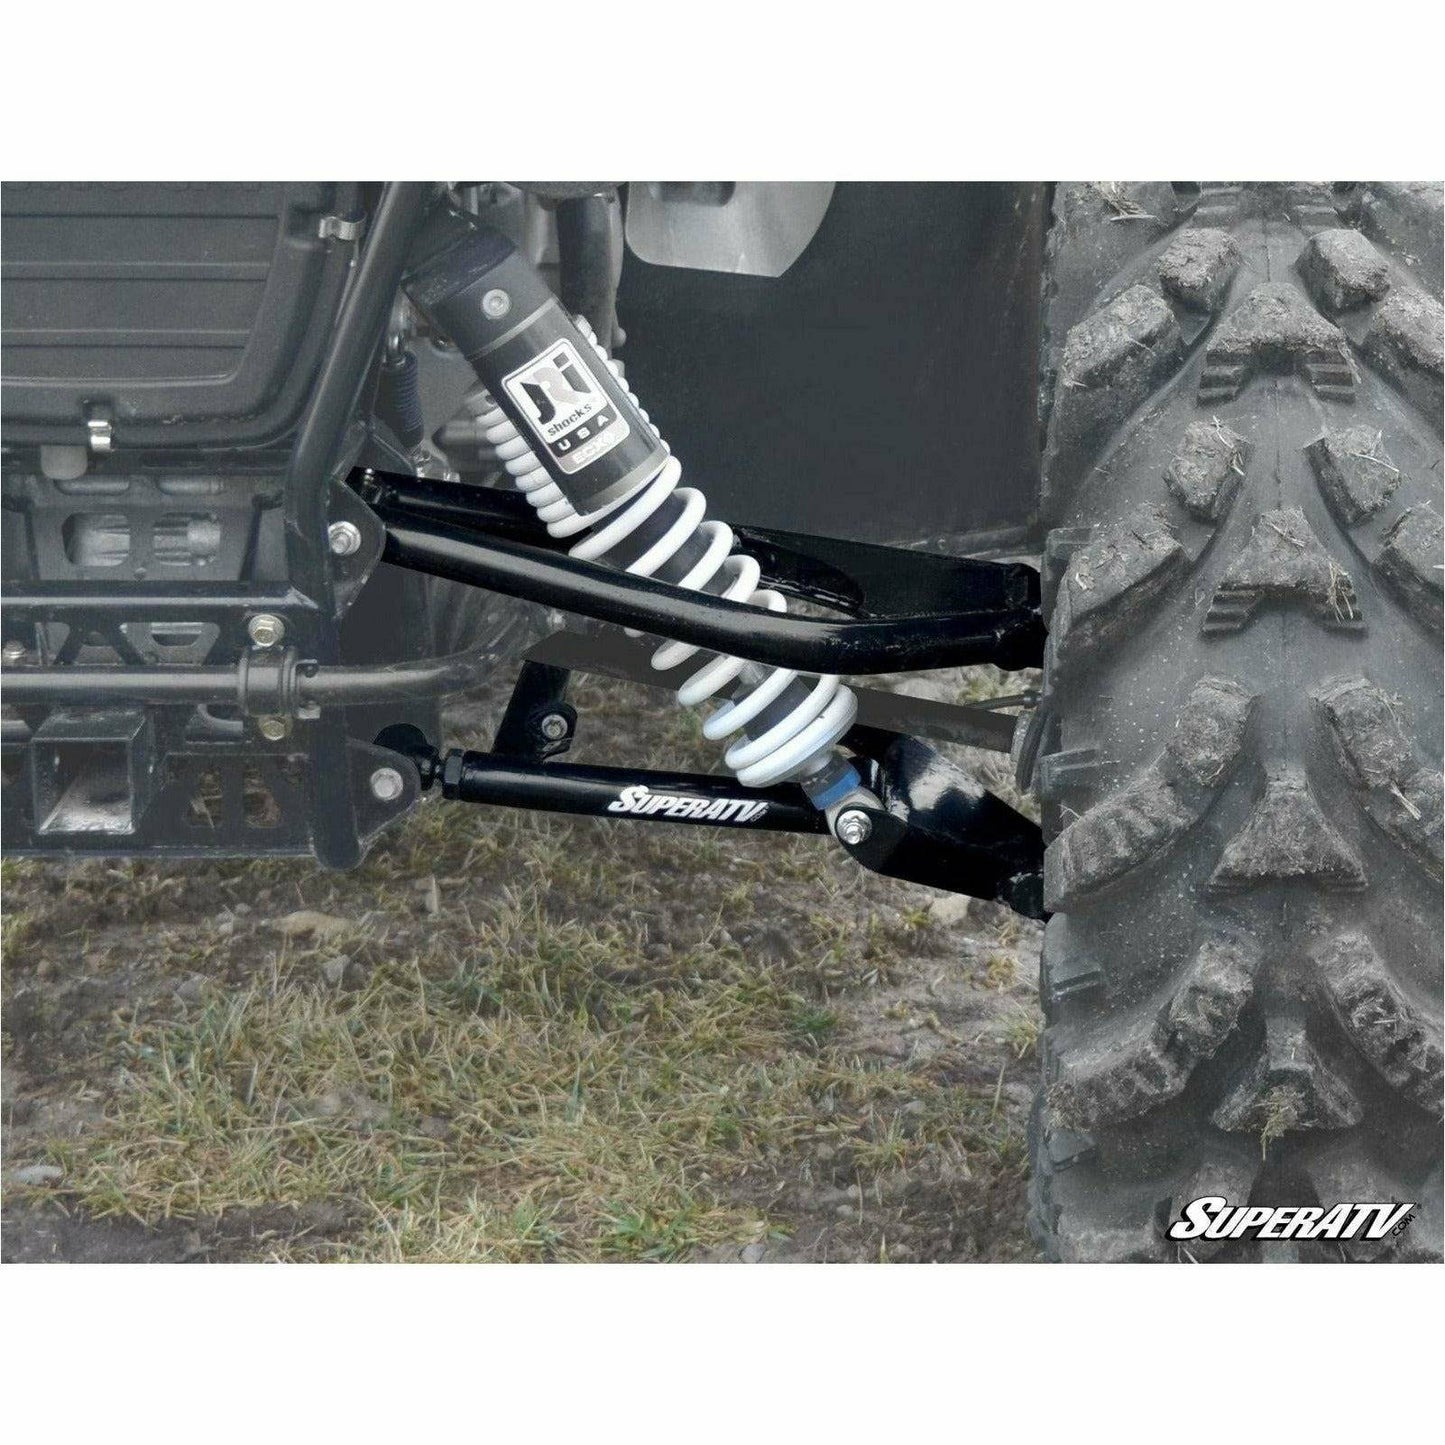 Arctic Cat Wildcat Sport High Clearance Rear A-Arms